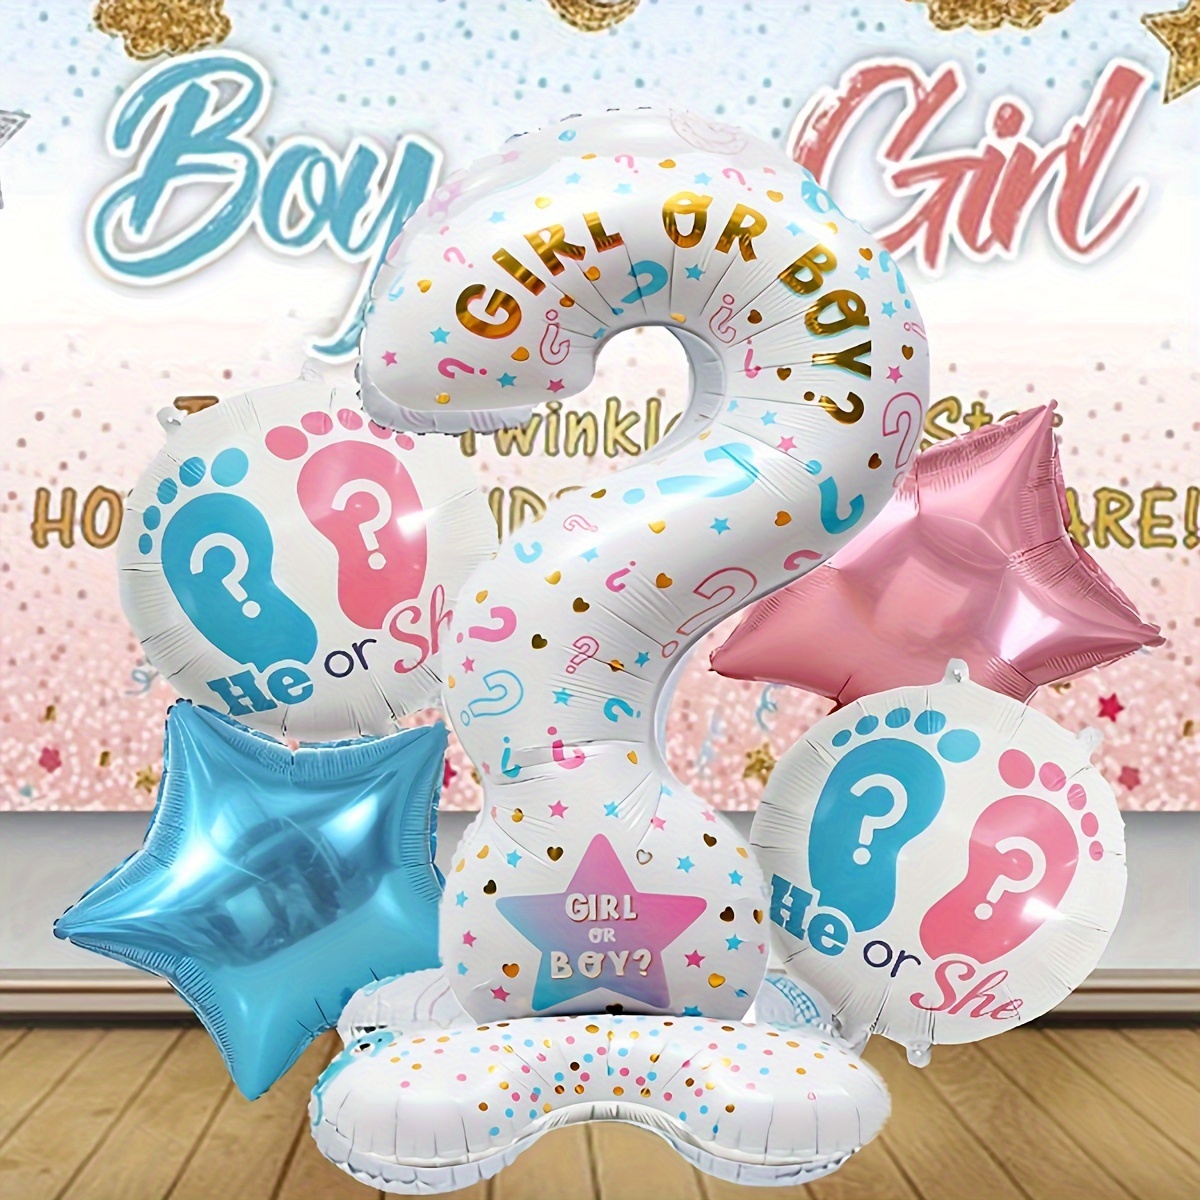 

Set, Gender Reveal Party Decoration Balloons, Boy Or Girl Party Decor, Birthday Decor, Celebration Decor, Theme Event Decor, Atmosphere Background Layout, Indoor Decor, Party Decor Supplies